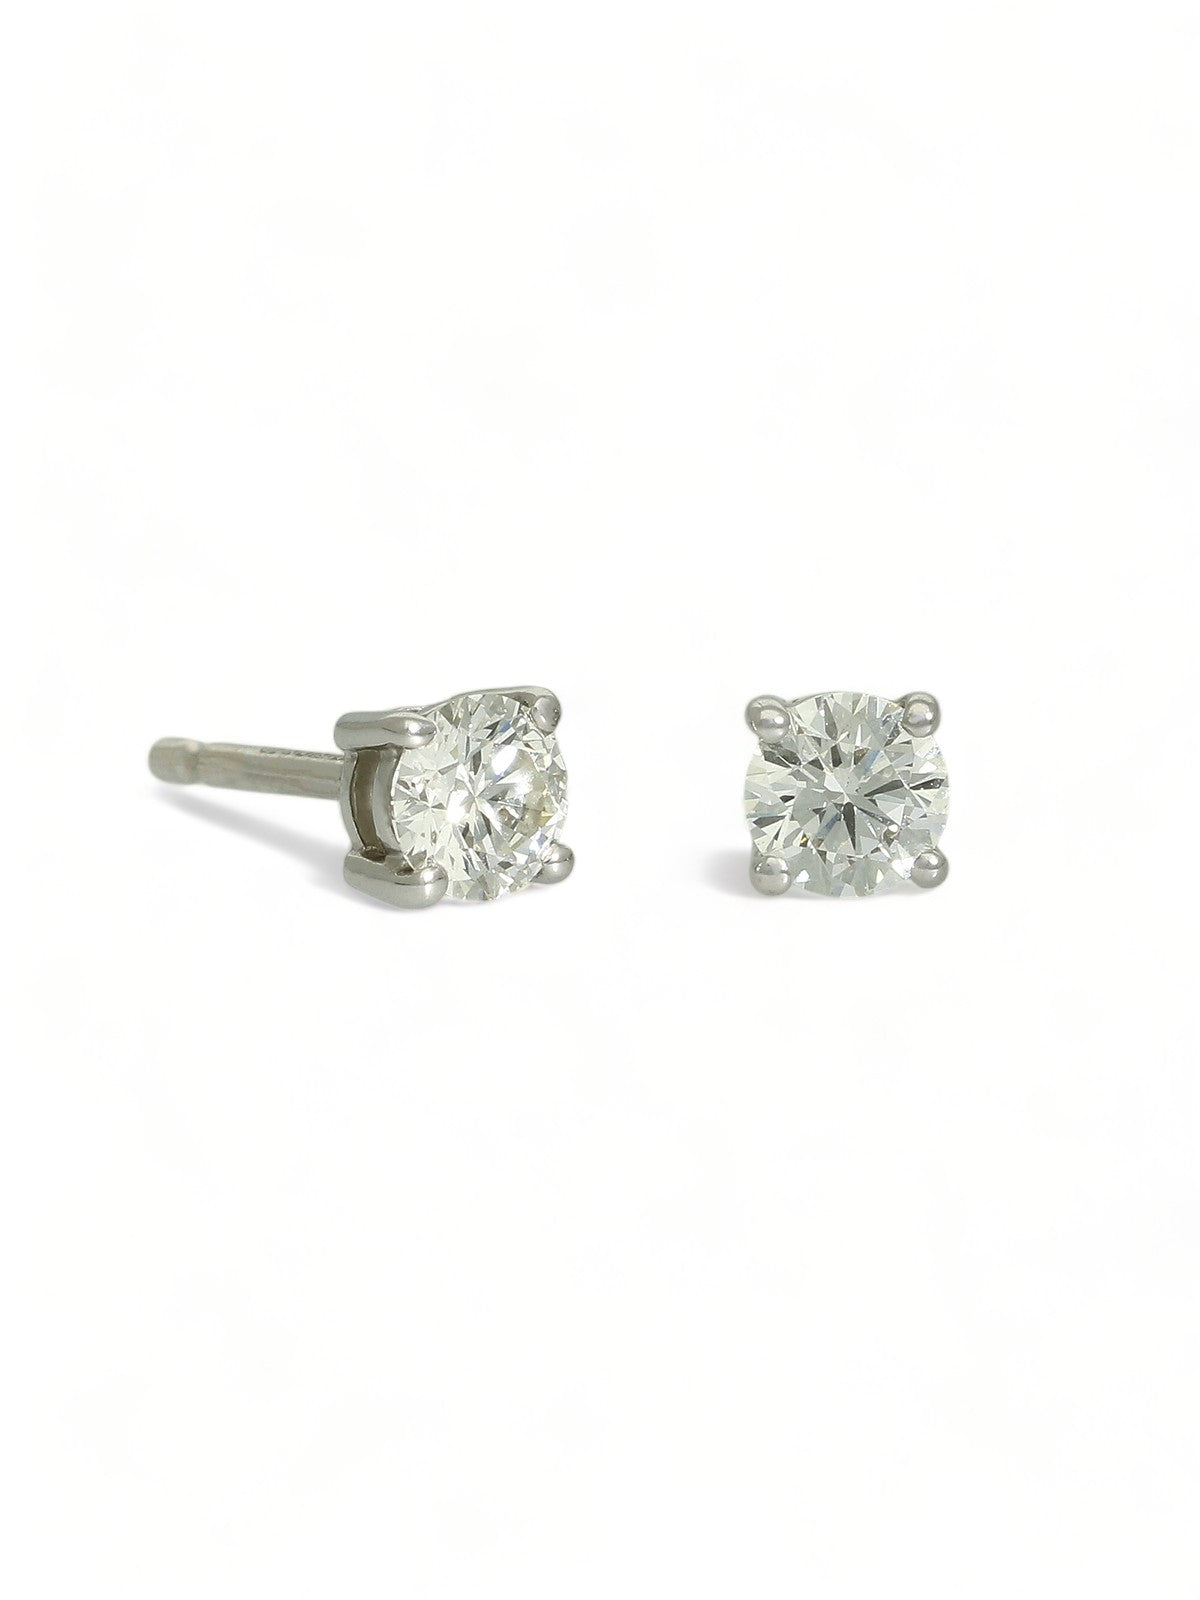 Diamond Solitaire Stud Earrings "The Catherine Collection" 0.60ct Round Brilliant Cut in 18ct White Gold